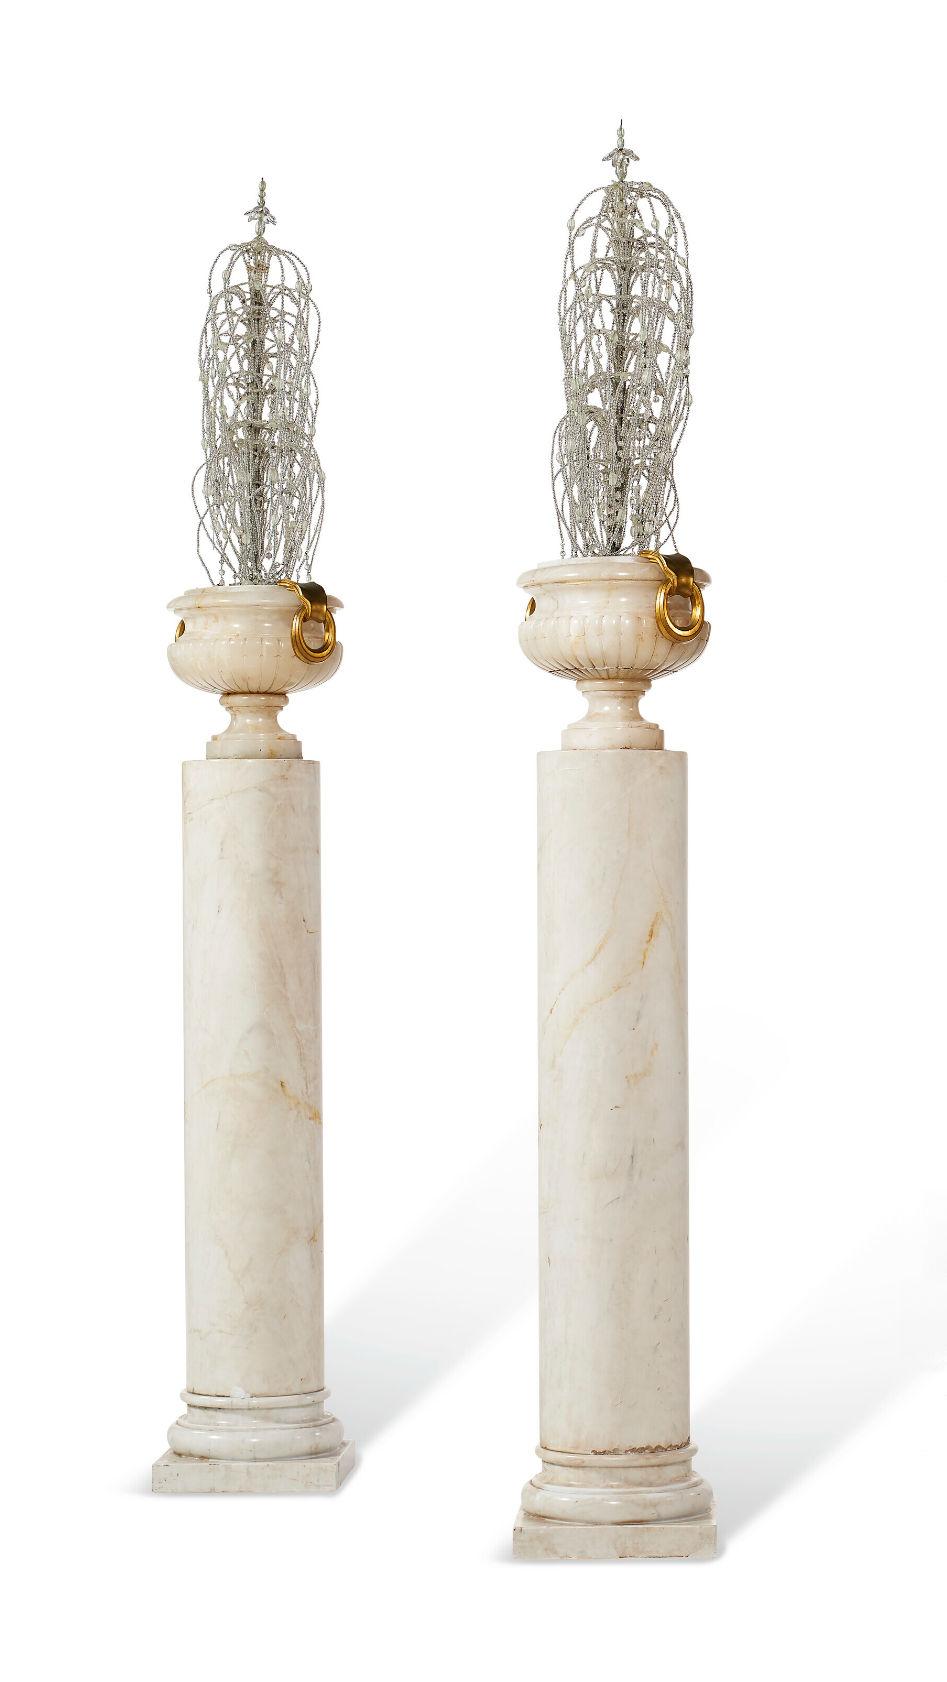 Our set of four neoclassical alabaster urns with ormolu bronze mounts, of northern European origin and dating from the early 20th century, feature cascading molded and beaded glass ornaments in the style of fountains and are mounted on pedestals.